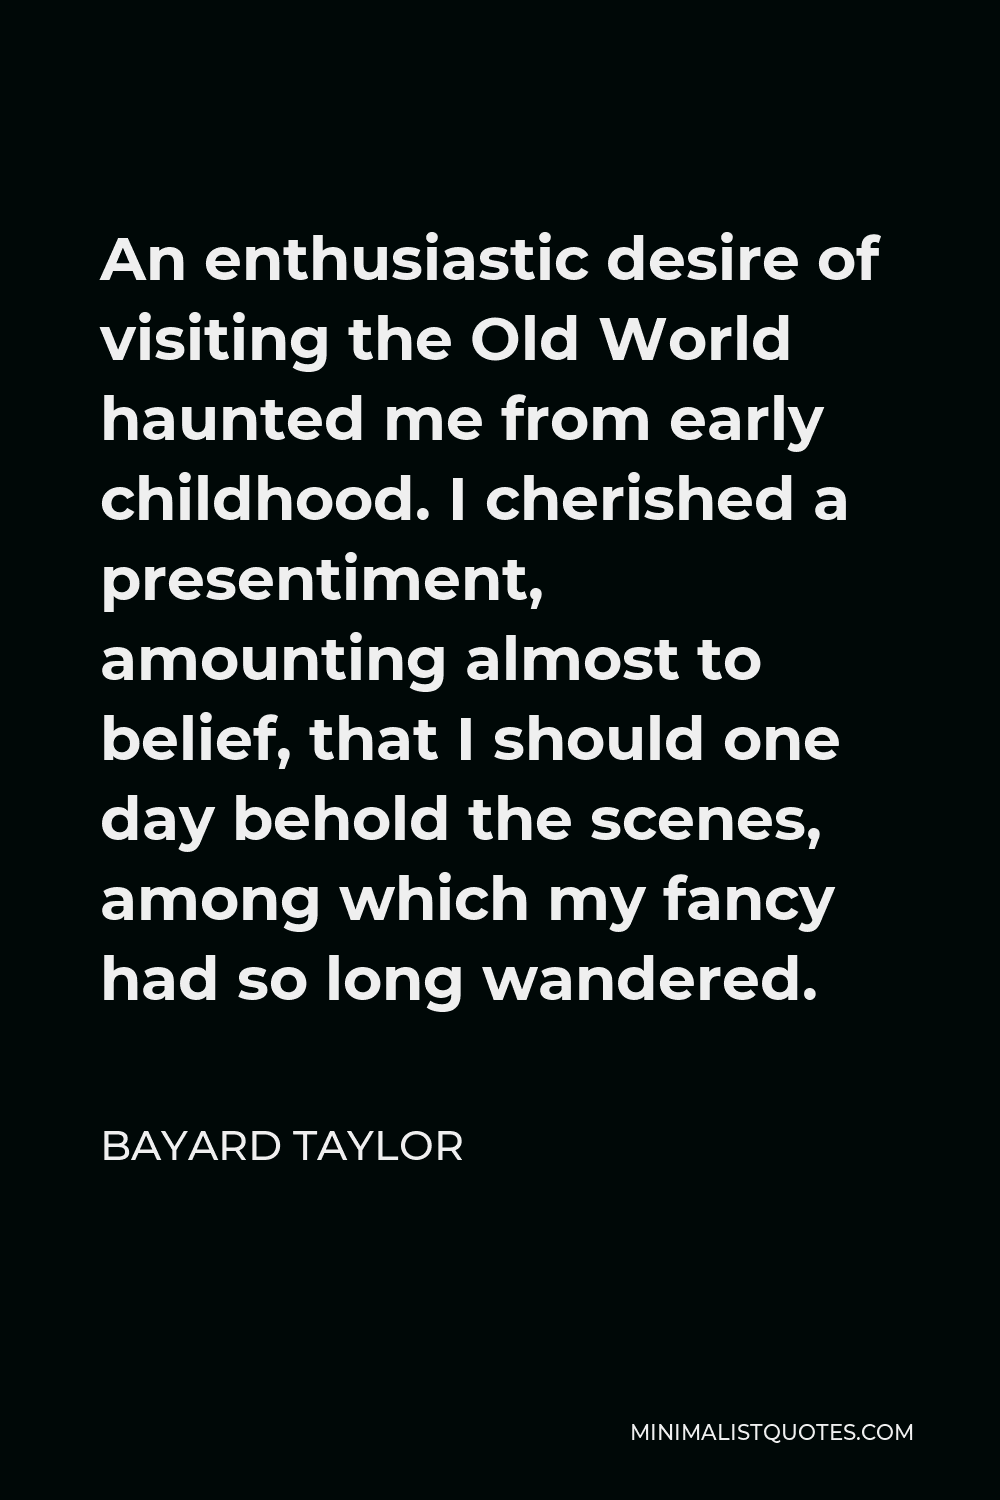 Bayard Taylor Quote - An enthusiastic desire of visiting the Old World haunted me from early childhood. I cherished a presentiment, amounting almost to belief, that I should one day behold the scenes, among which my fancy had so long wandered.